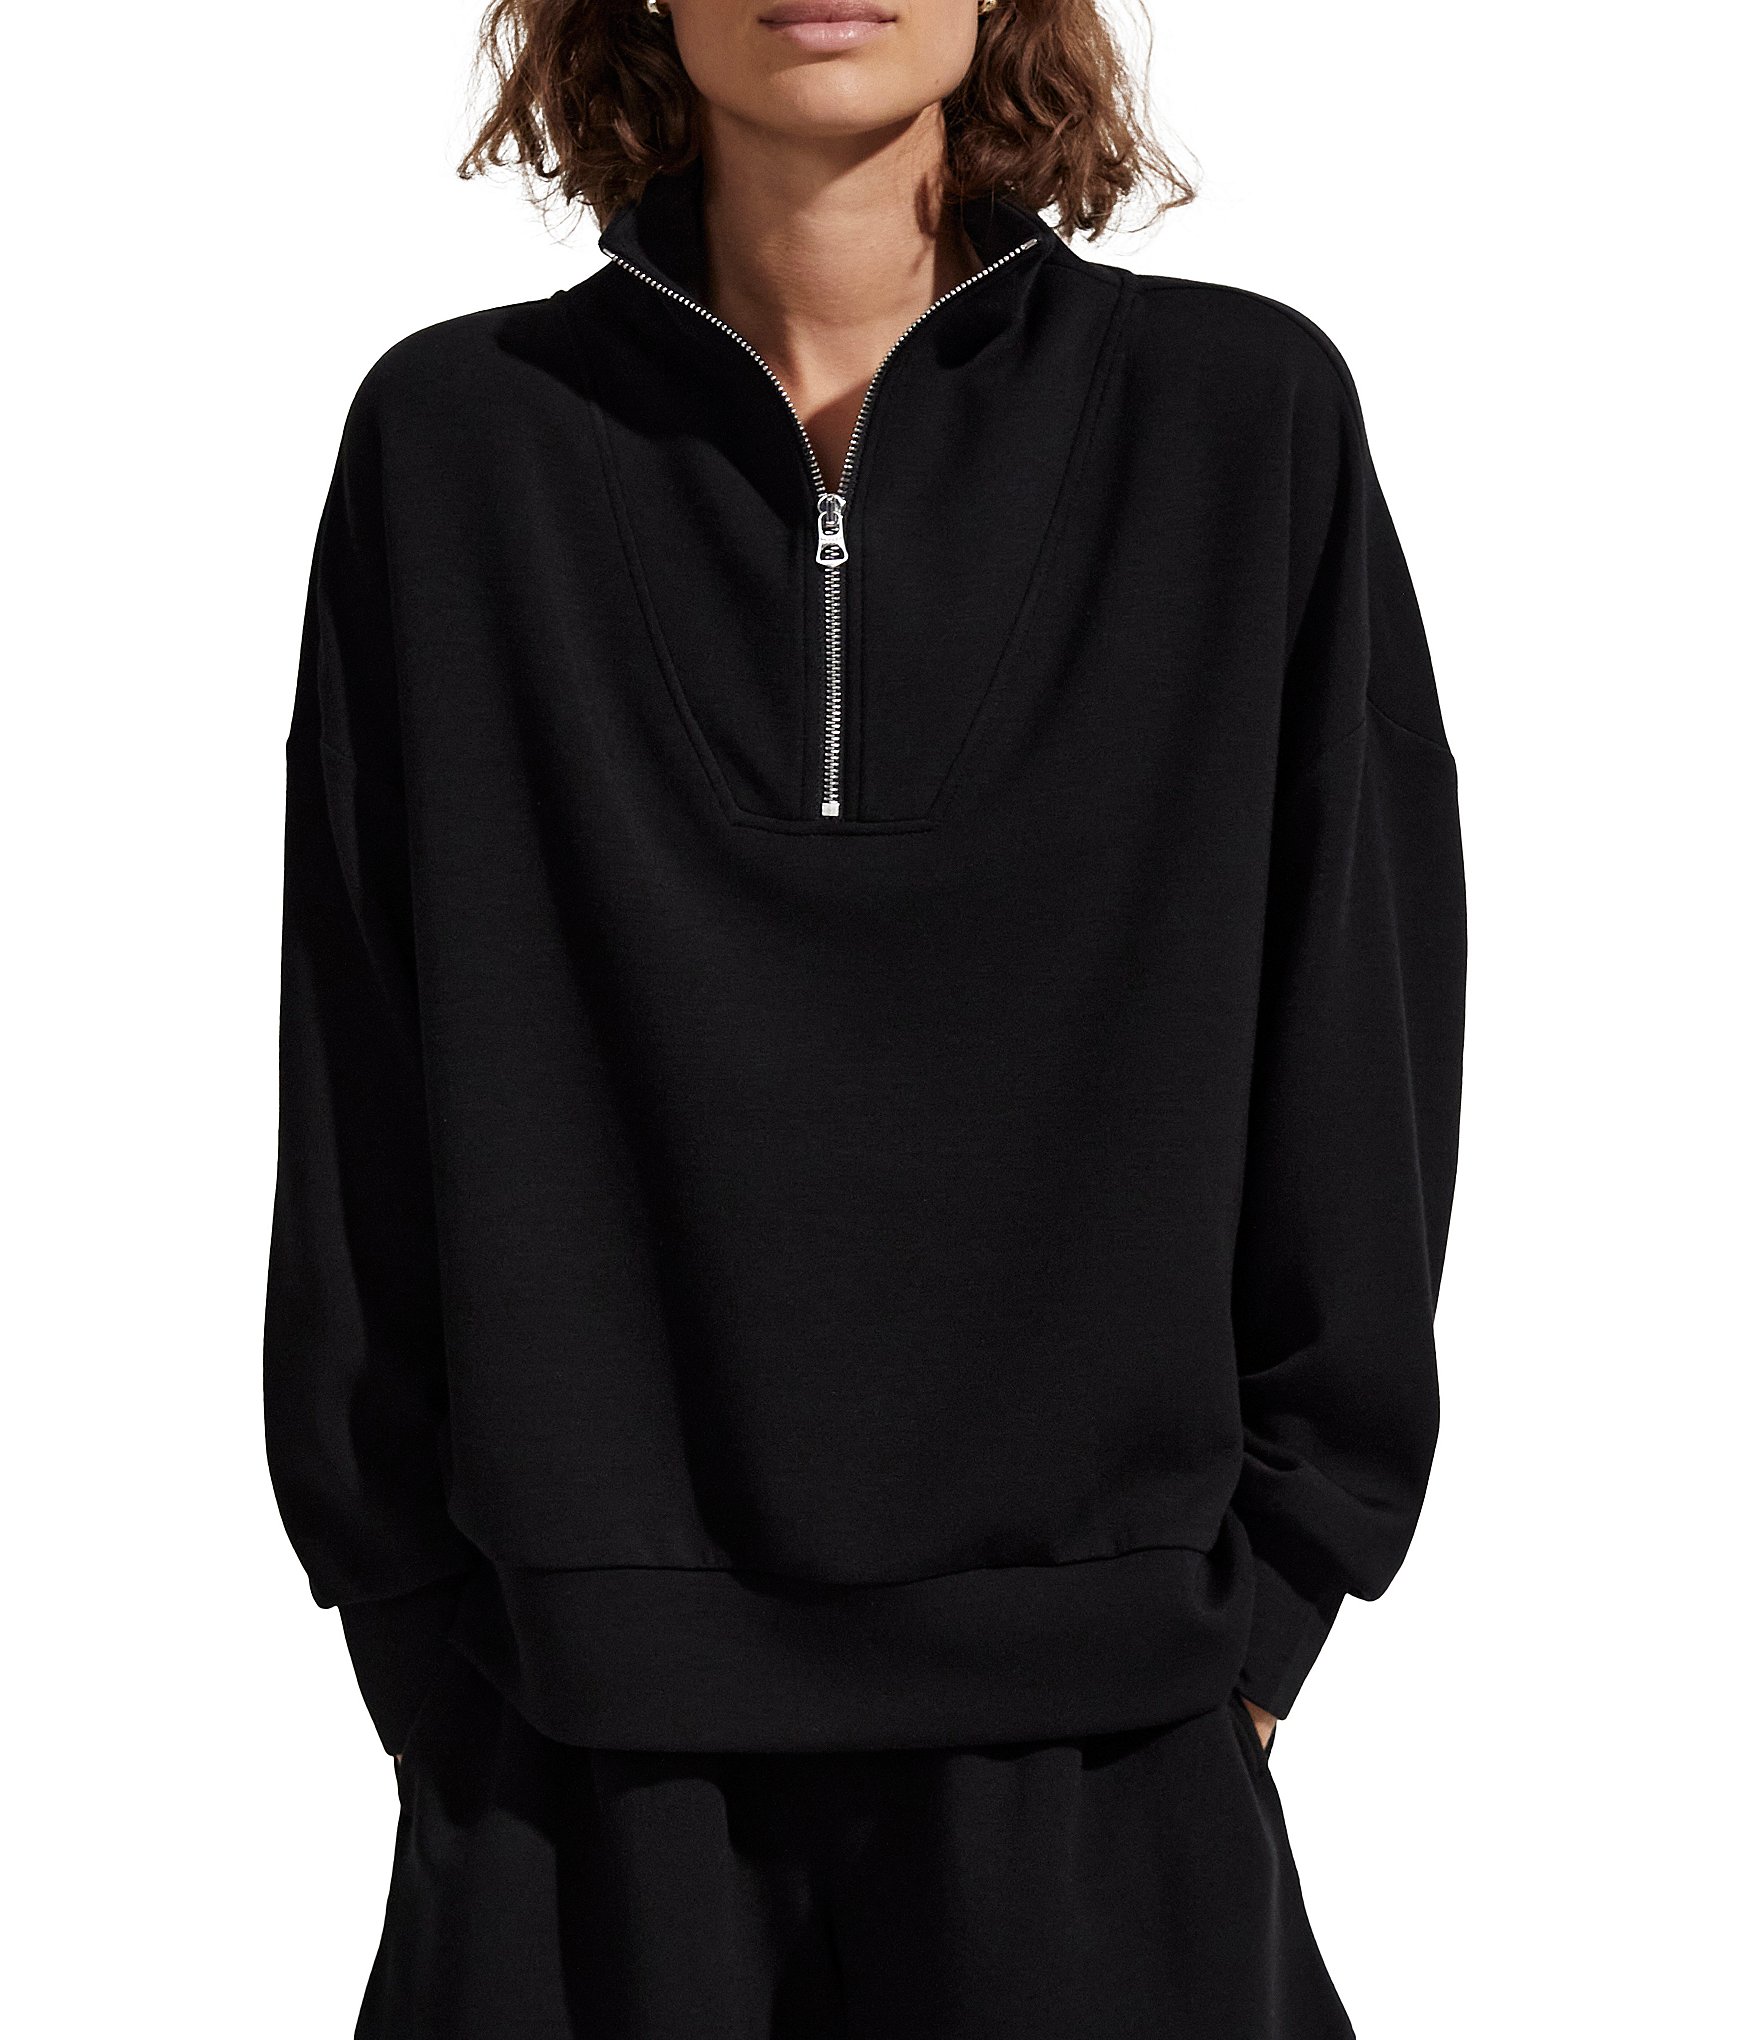 Womens Oversized Hoodies 1/4 Zip High Neck Sweatshirts with Pocket Long  Sleeve Cozy Plain Pullover Sweater Tops (3X-Large, Black)